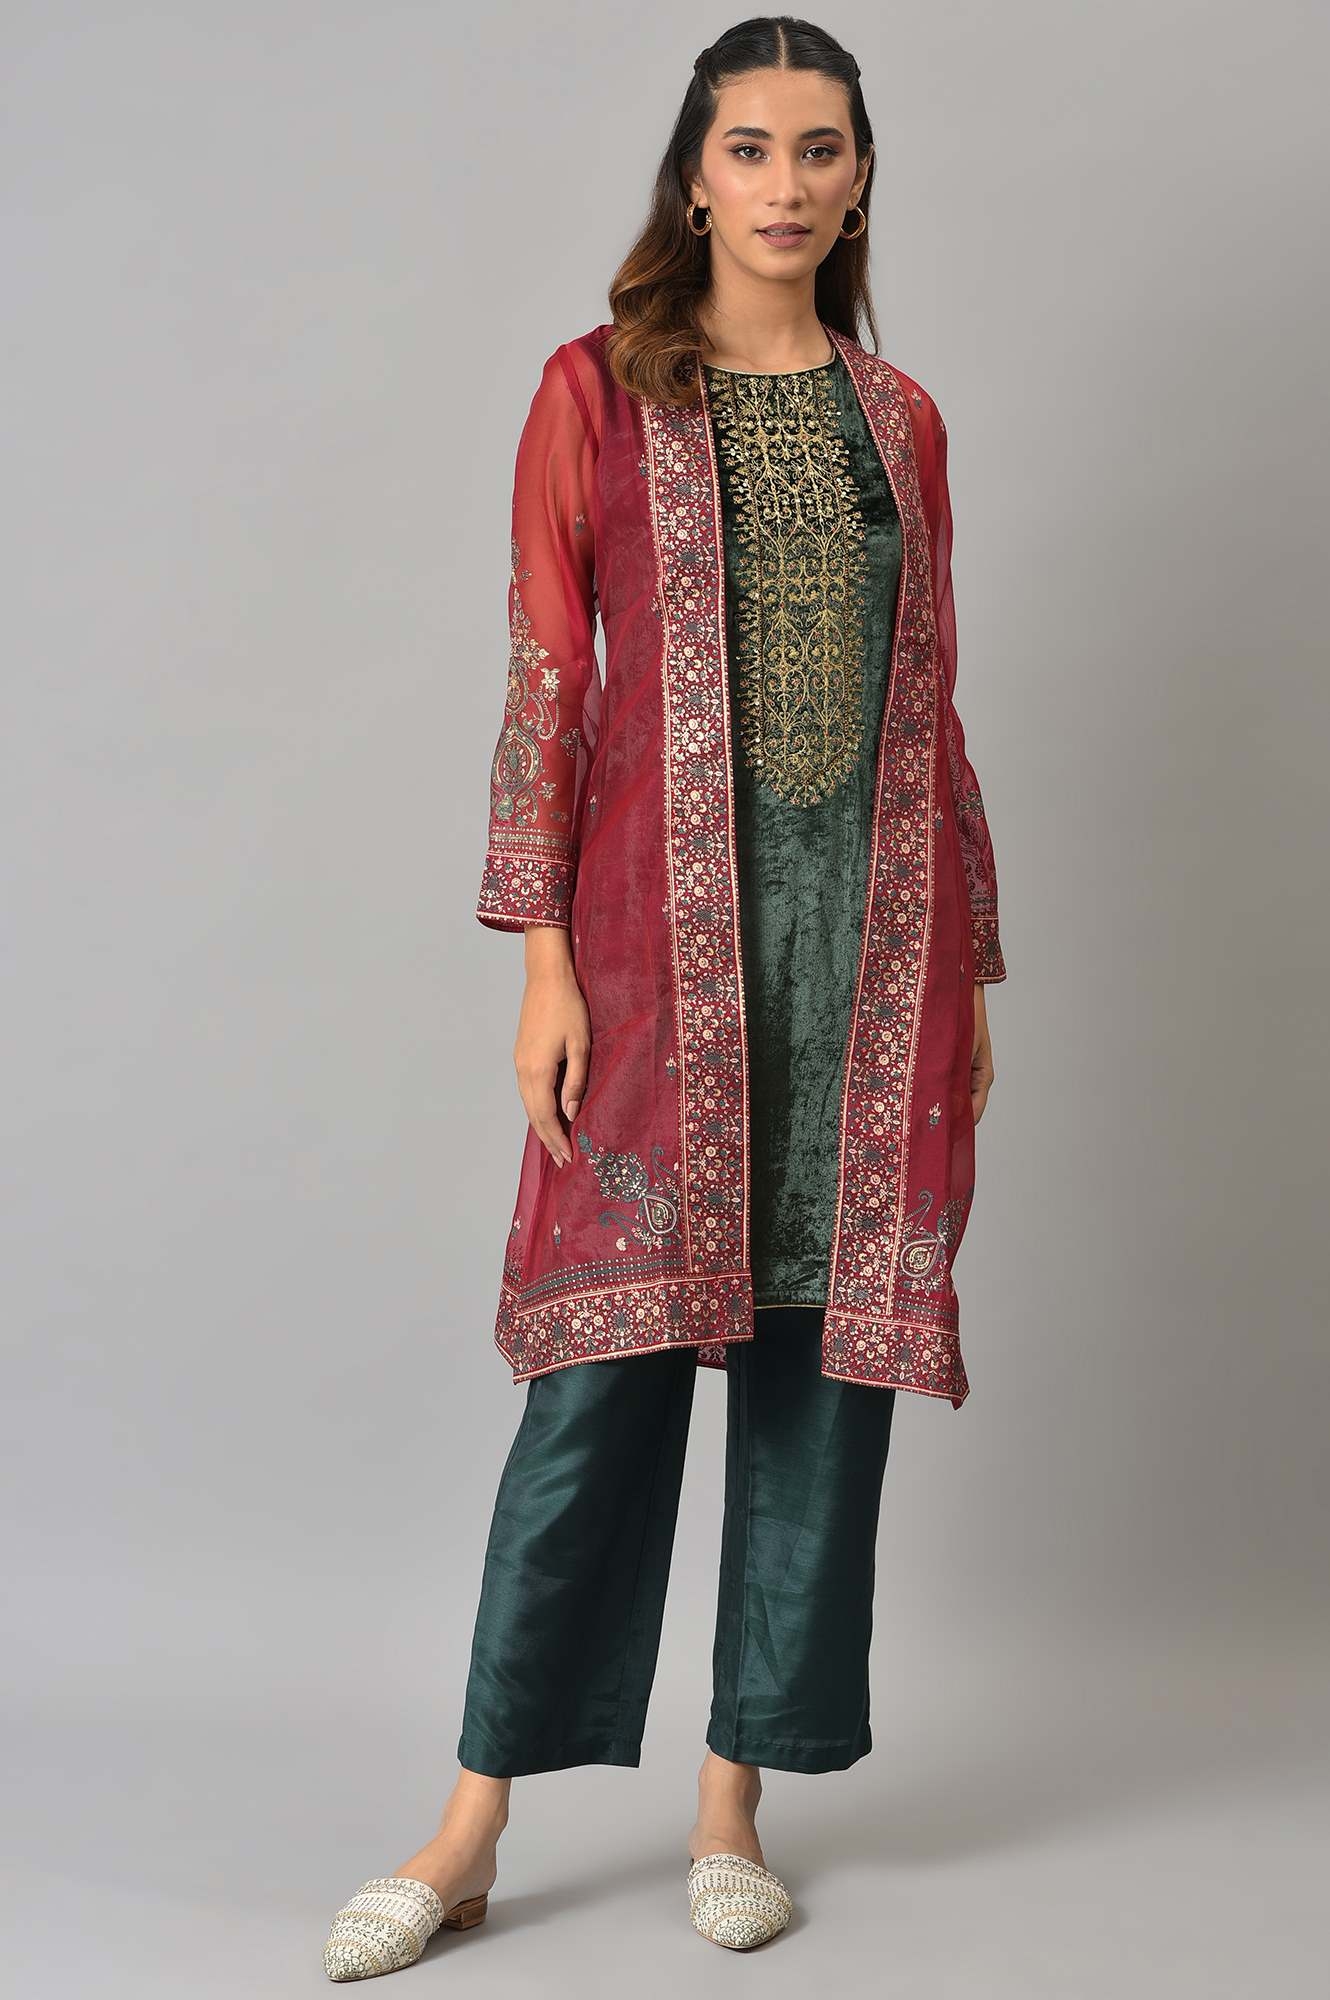 W | Wishful by W Red Organza Jacket with Green Mettalic Embroidered Kurta and Pants